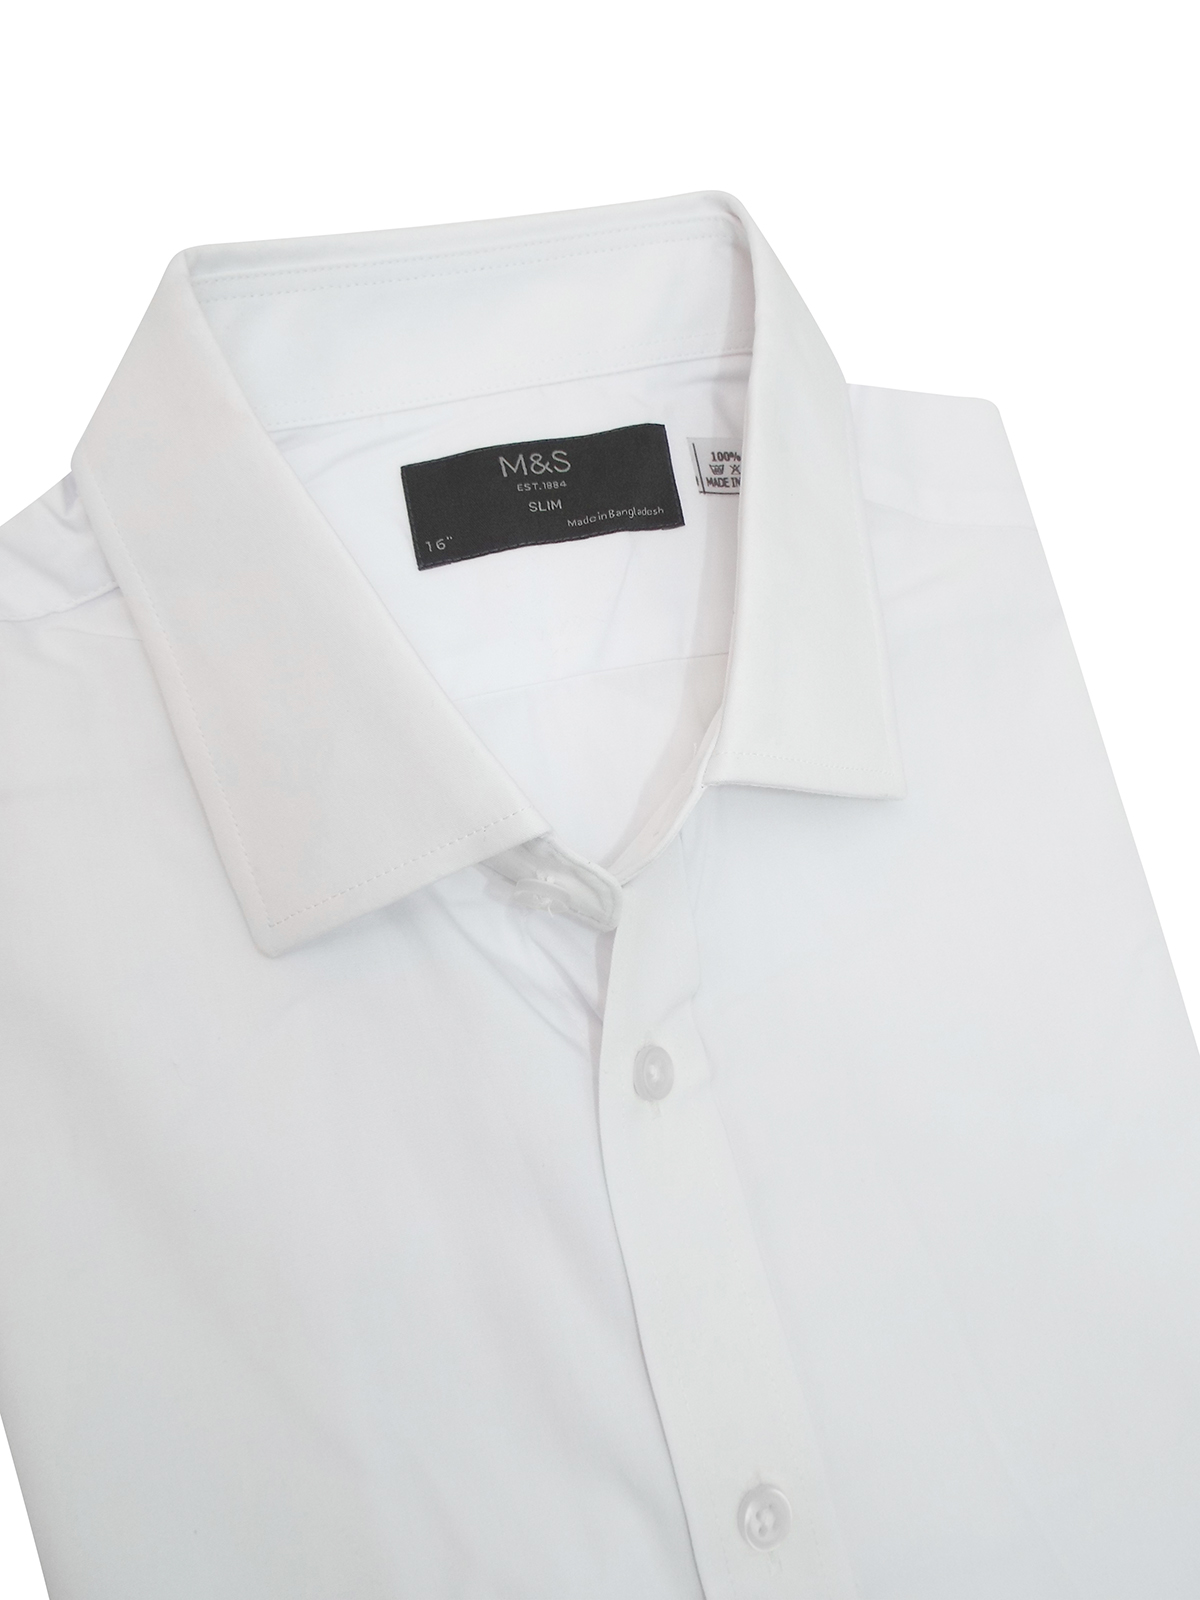 Marks and Spencer - - M&5 WHITE Pure Cotton Slim Fit Long Sleeve Shirt ...